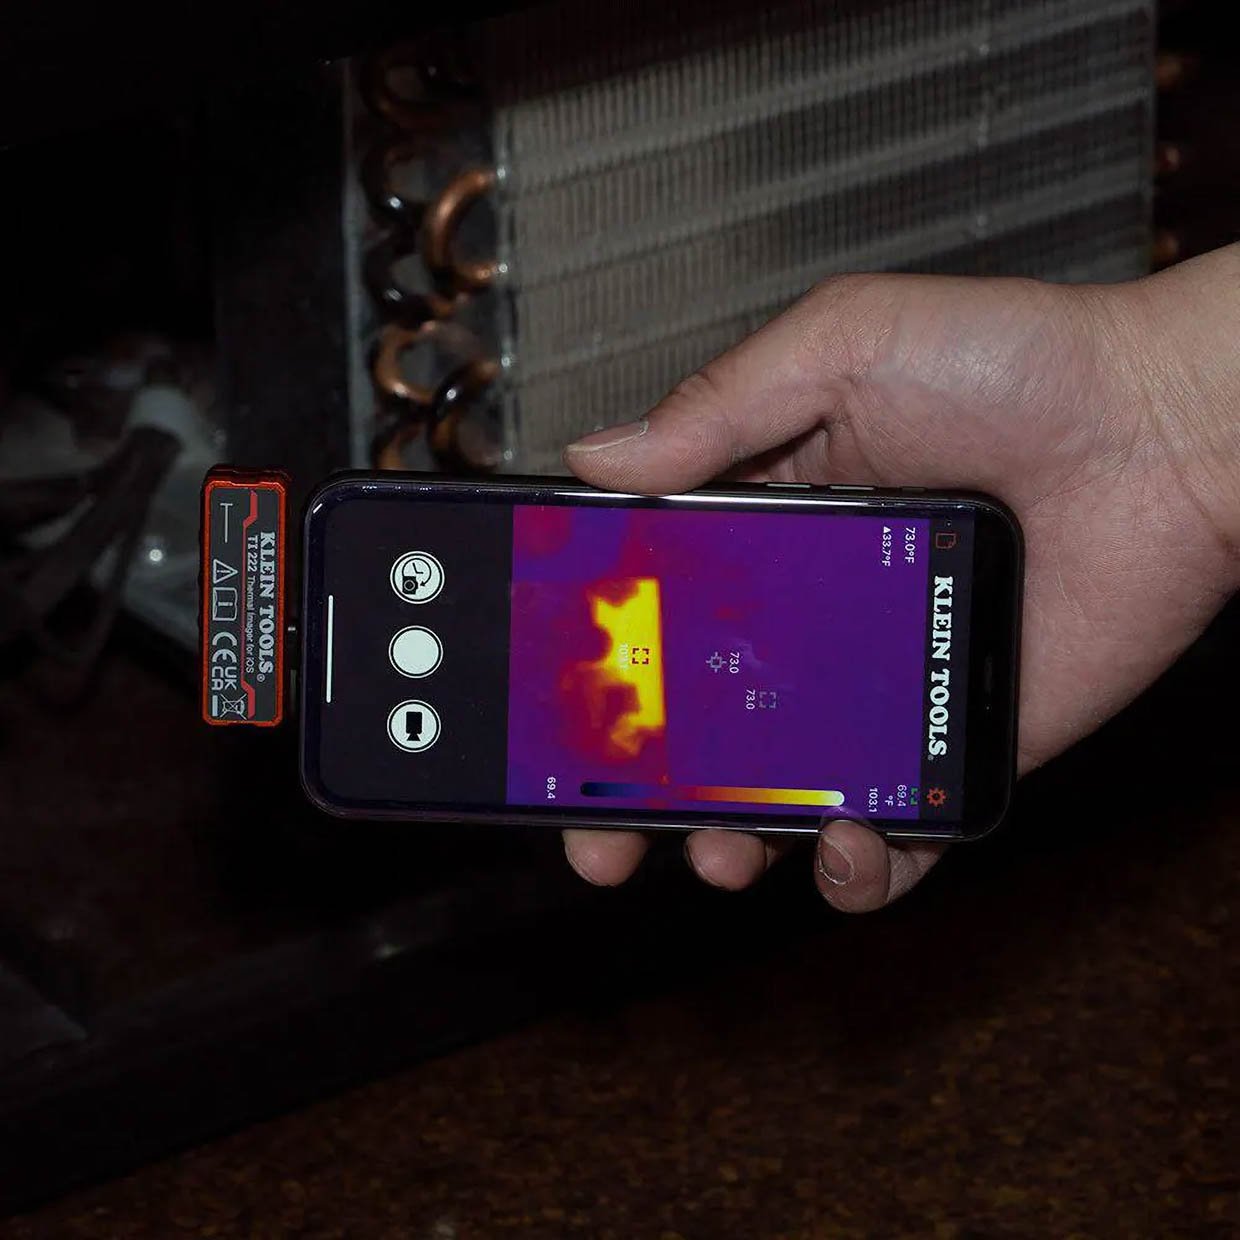 Klein Tools iOS Thermal Imager